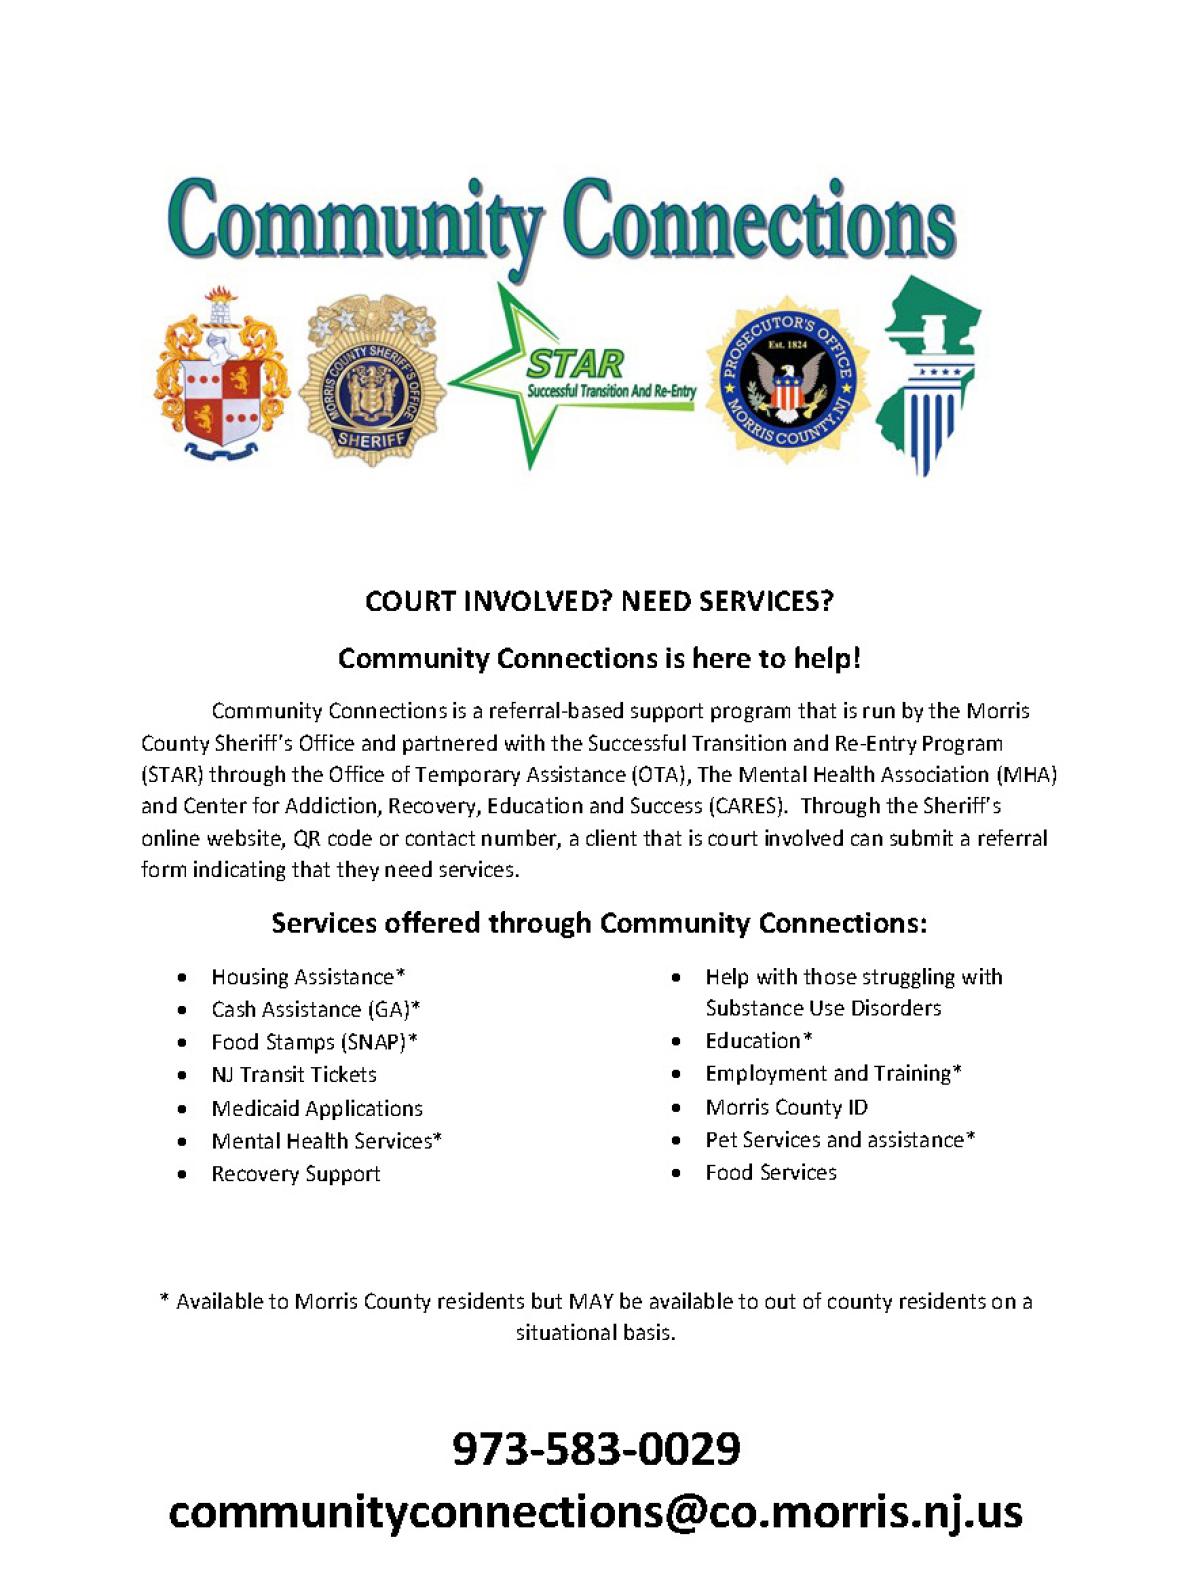 Community Connections – Morris County Info Sheet